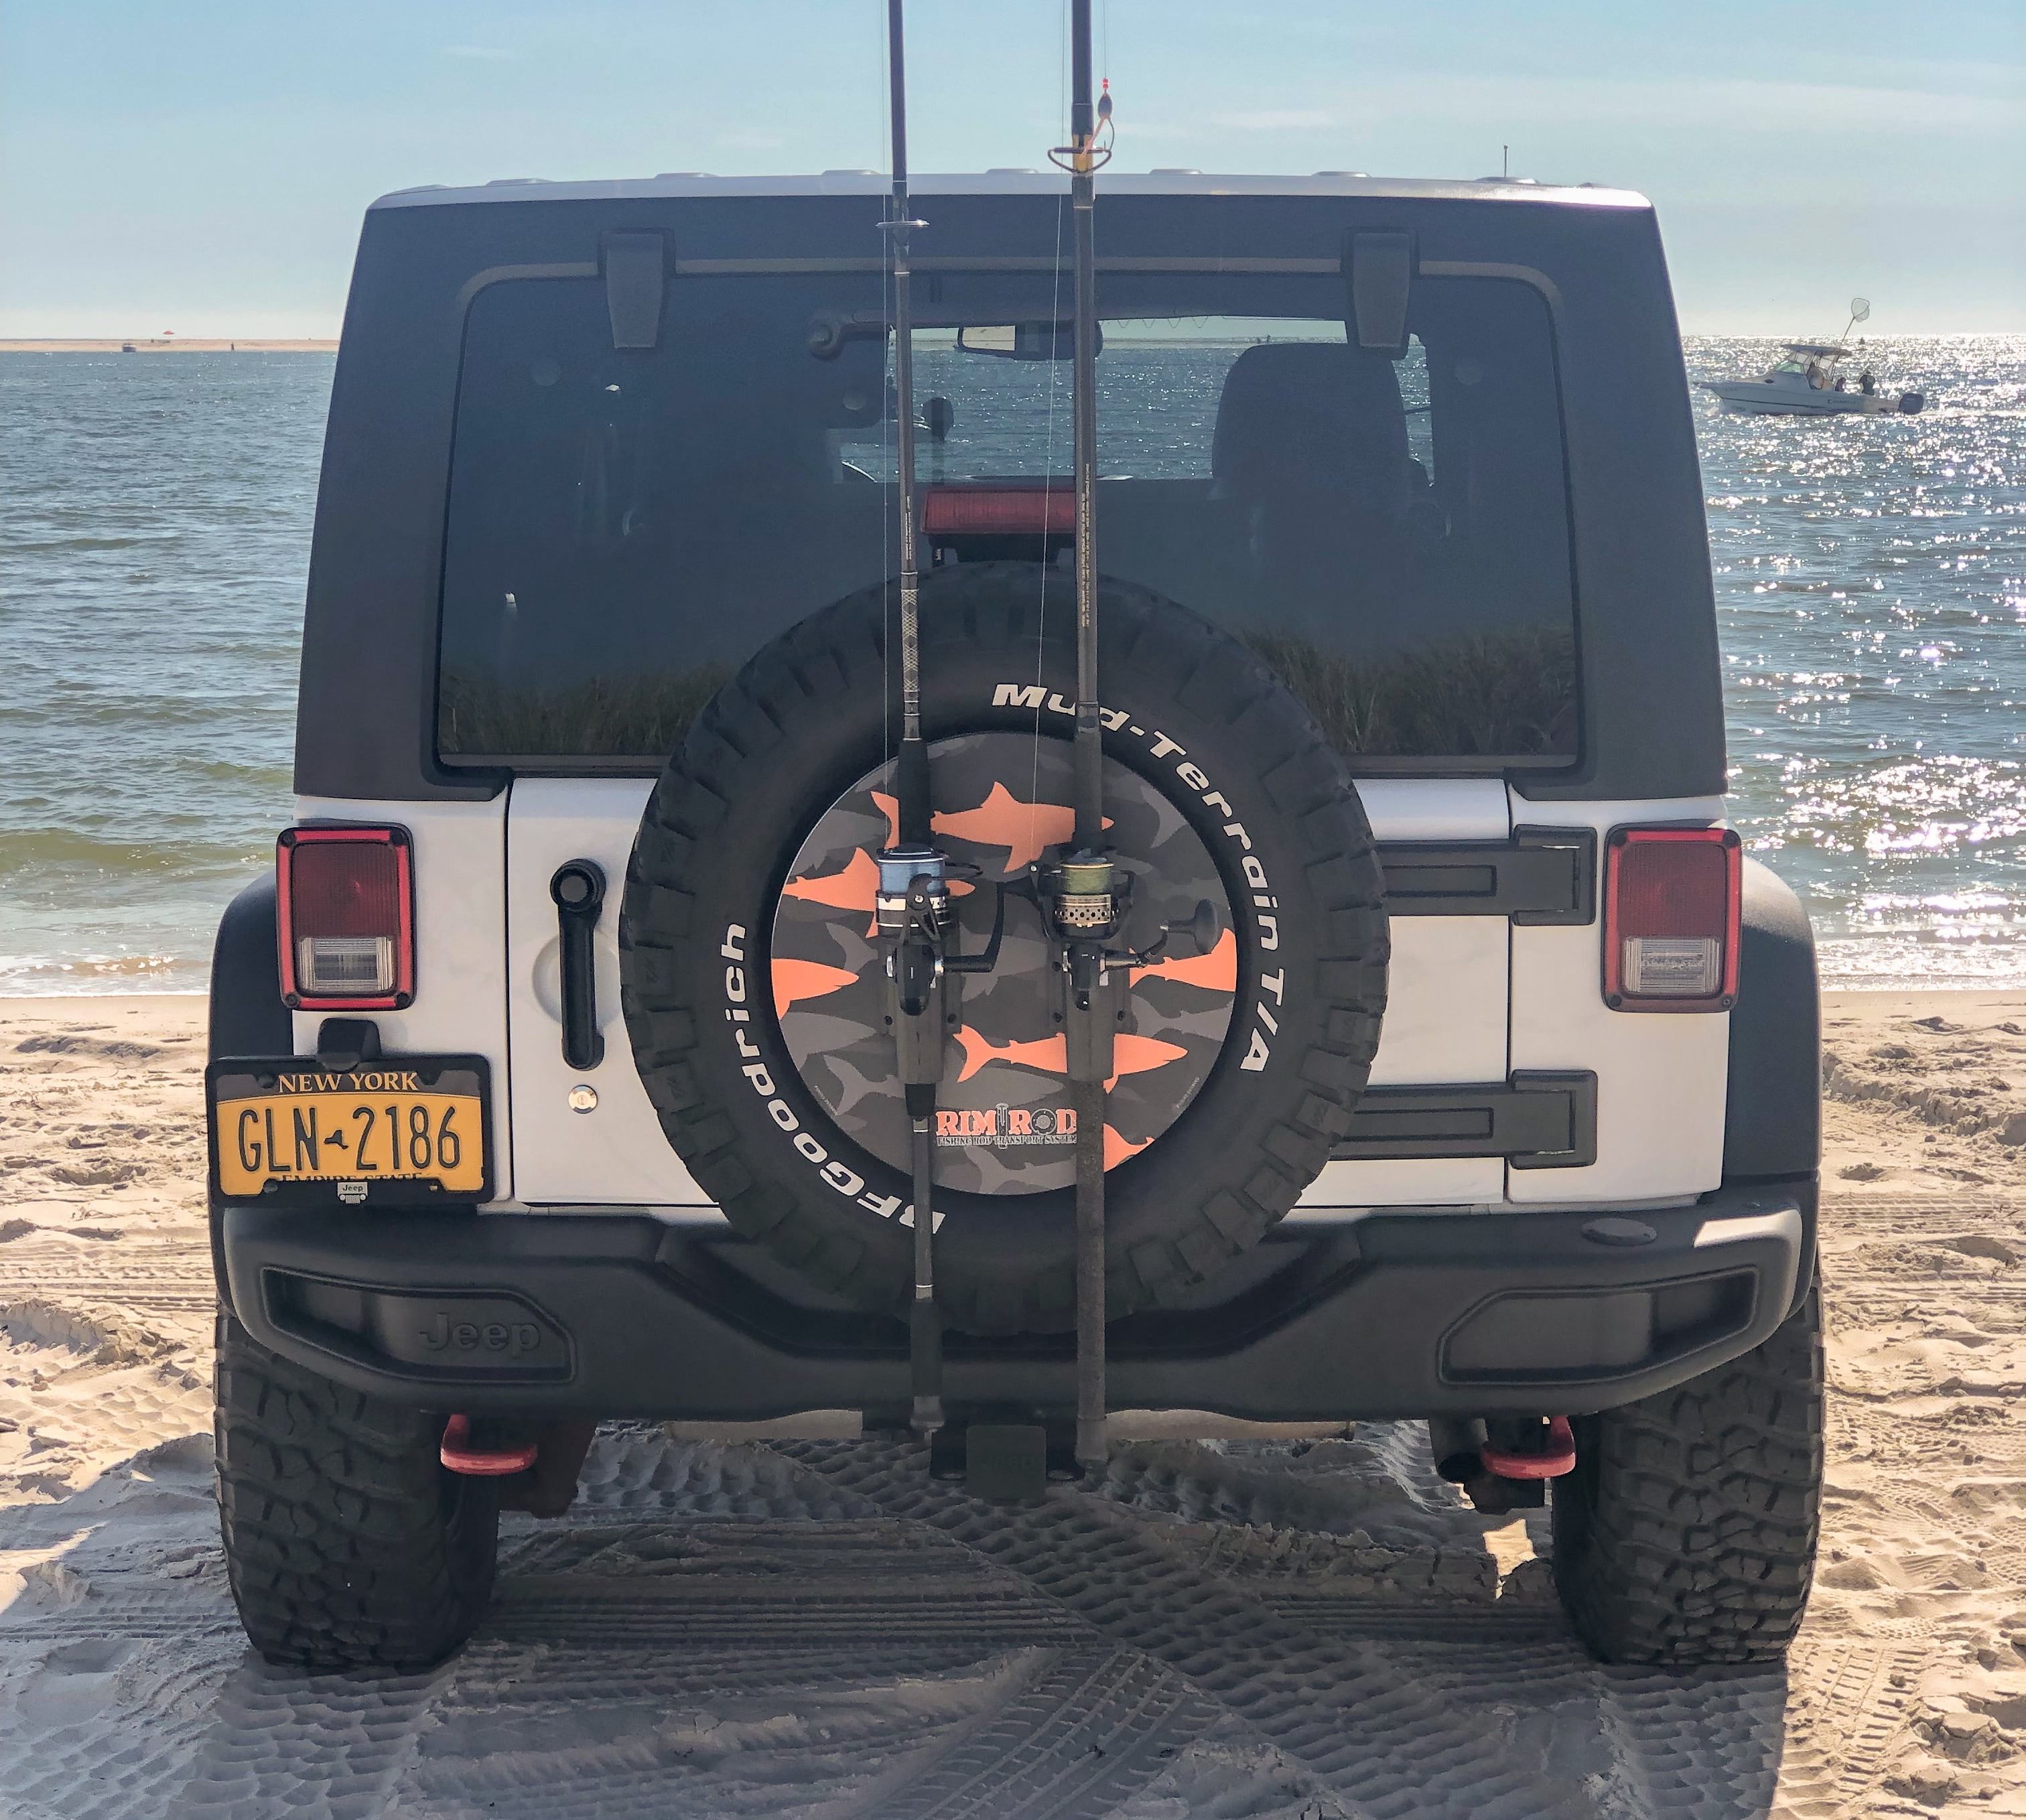 RIM-ROD IS THE OFFICIAL TRANSPORT SYSTEM YOU NEED TO GET YOUR FISHING GEAR  WHEREVER YOU For Jeep Wranglers, Jeep Fishing Pole Holder